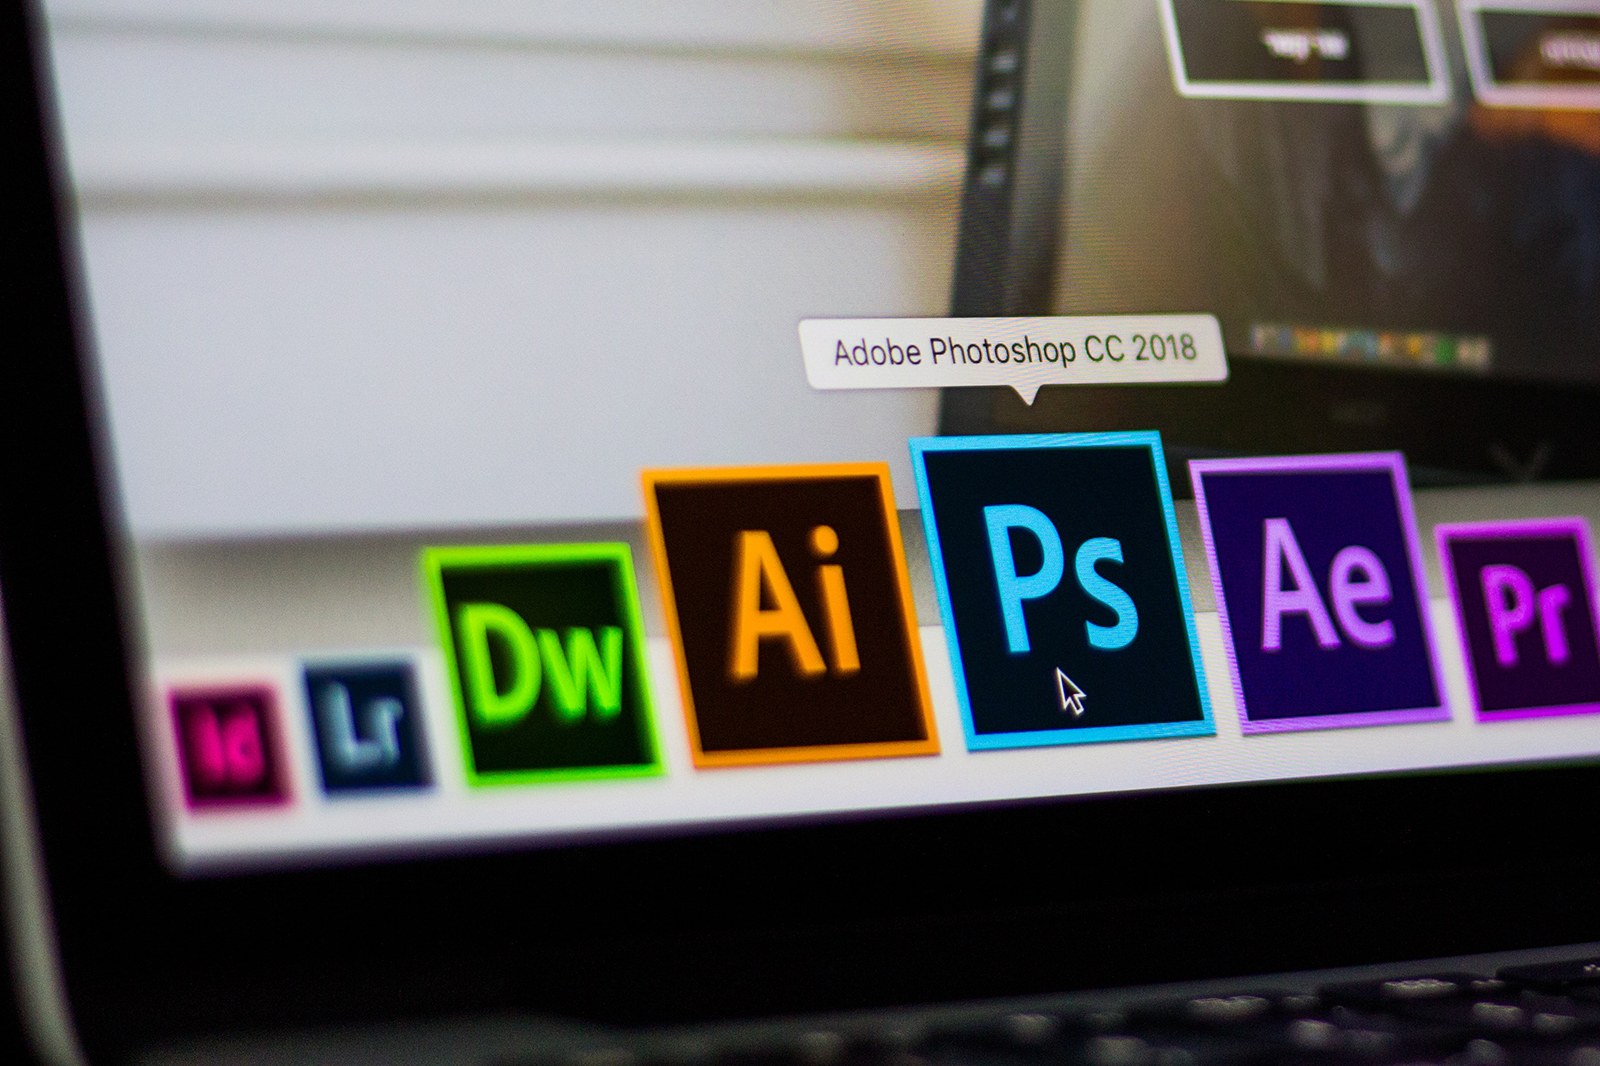 Adobe Photoshop Free Trial: Get a month of editing for free